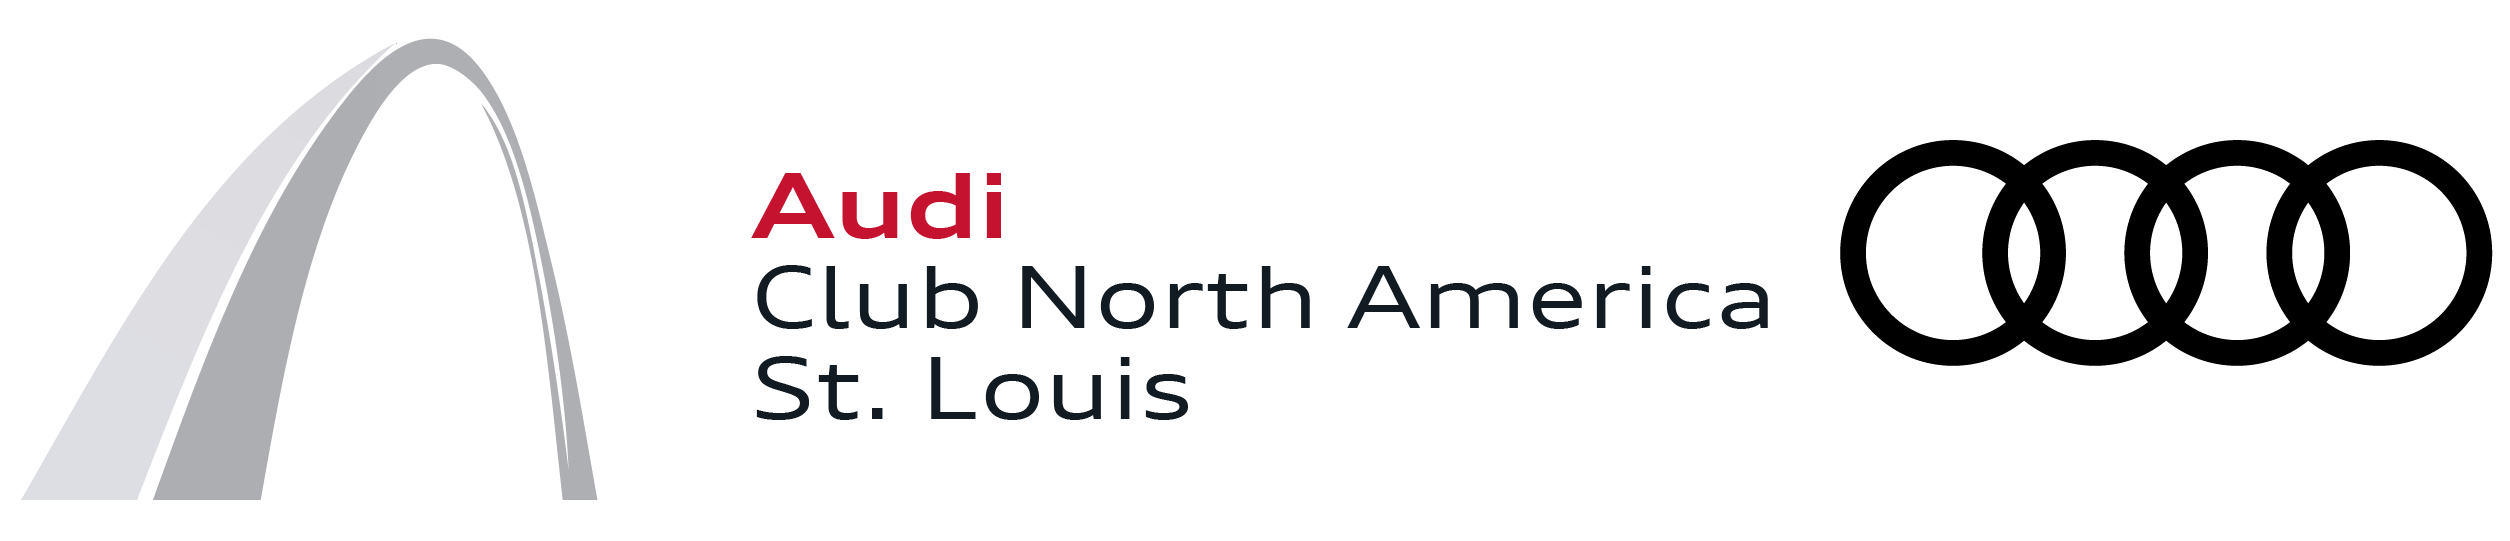 St. Louis Chapter – Audi Club North America